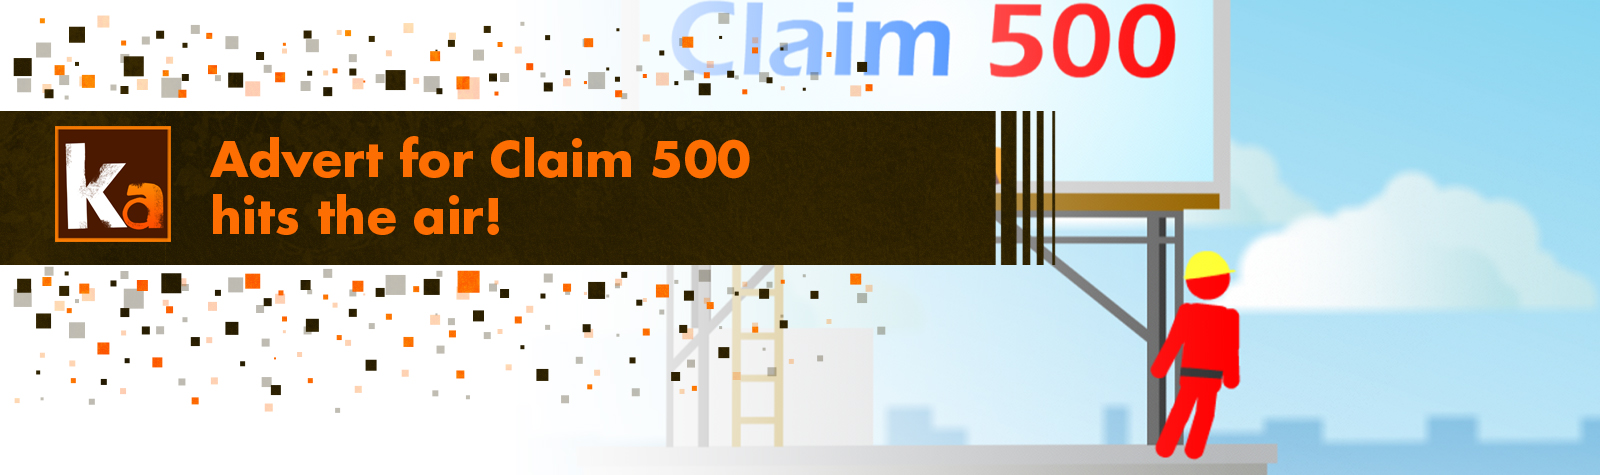 Advert for Claim 500 hits the air!